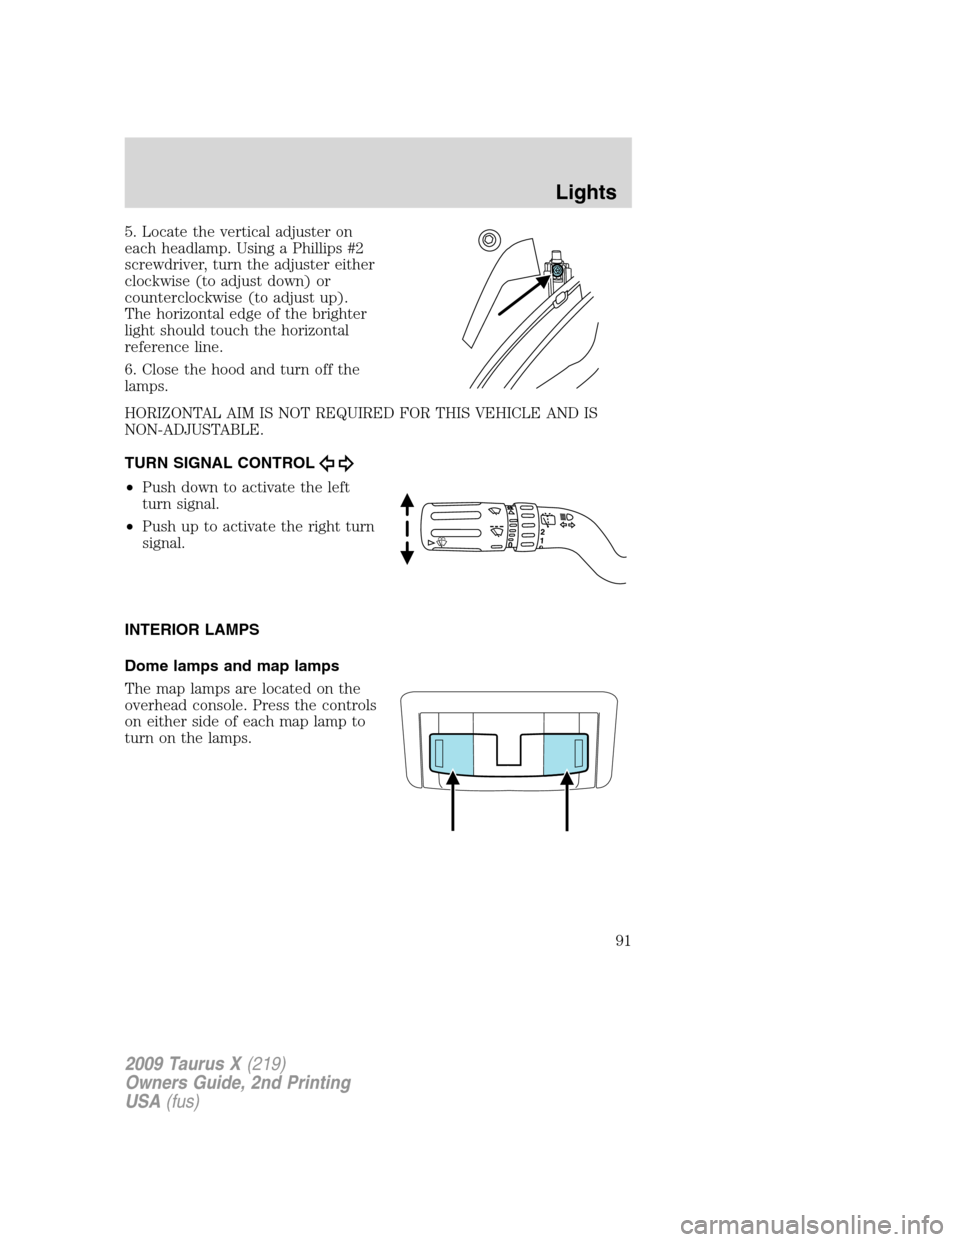 FORD TAURUS X 2009 1.G Owners Manual 5. Locate the vertical adjuster on
each headlamp. Using a Phillips #2
screwdriver, turn the adjuster either
clockwise (to adjust down) or
counterclockwise (to adjust up).
The horizontal edge of the br